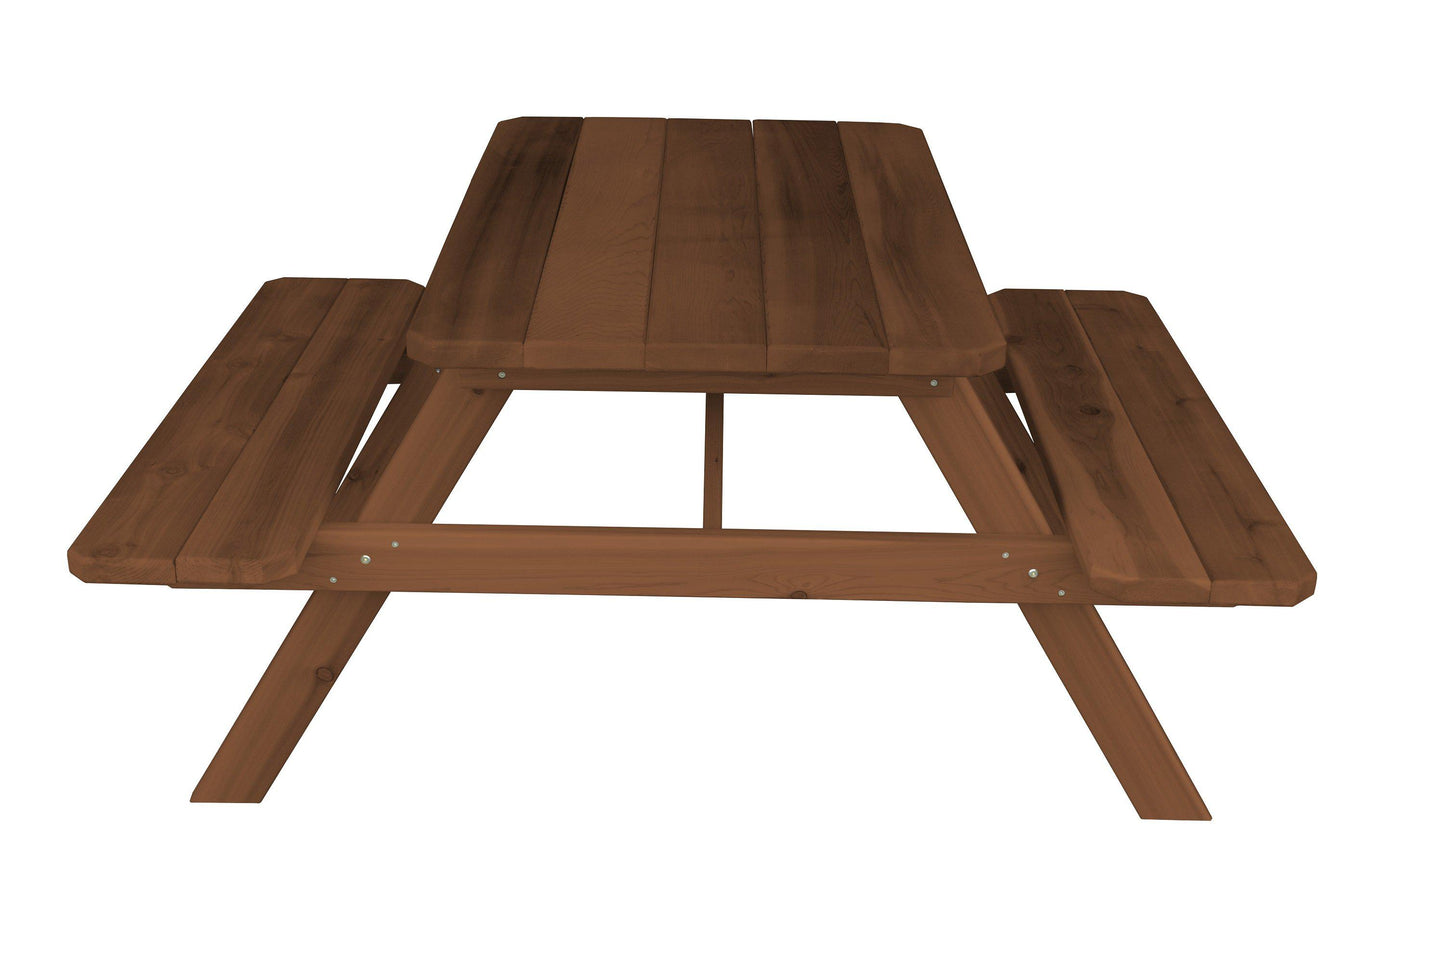 Regallion Outdoor Western Red Cedar 5' Table w/Attached Benches - LEAD TIME TO SHIP 2 WEEKS